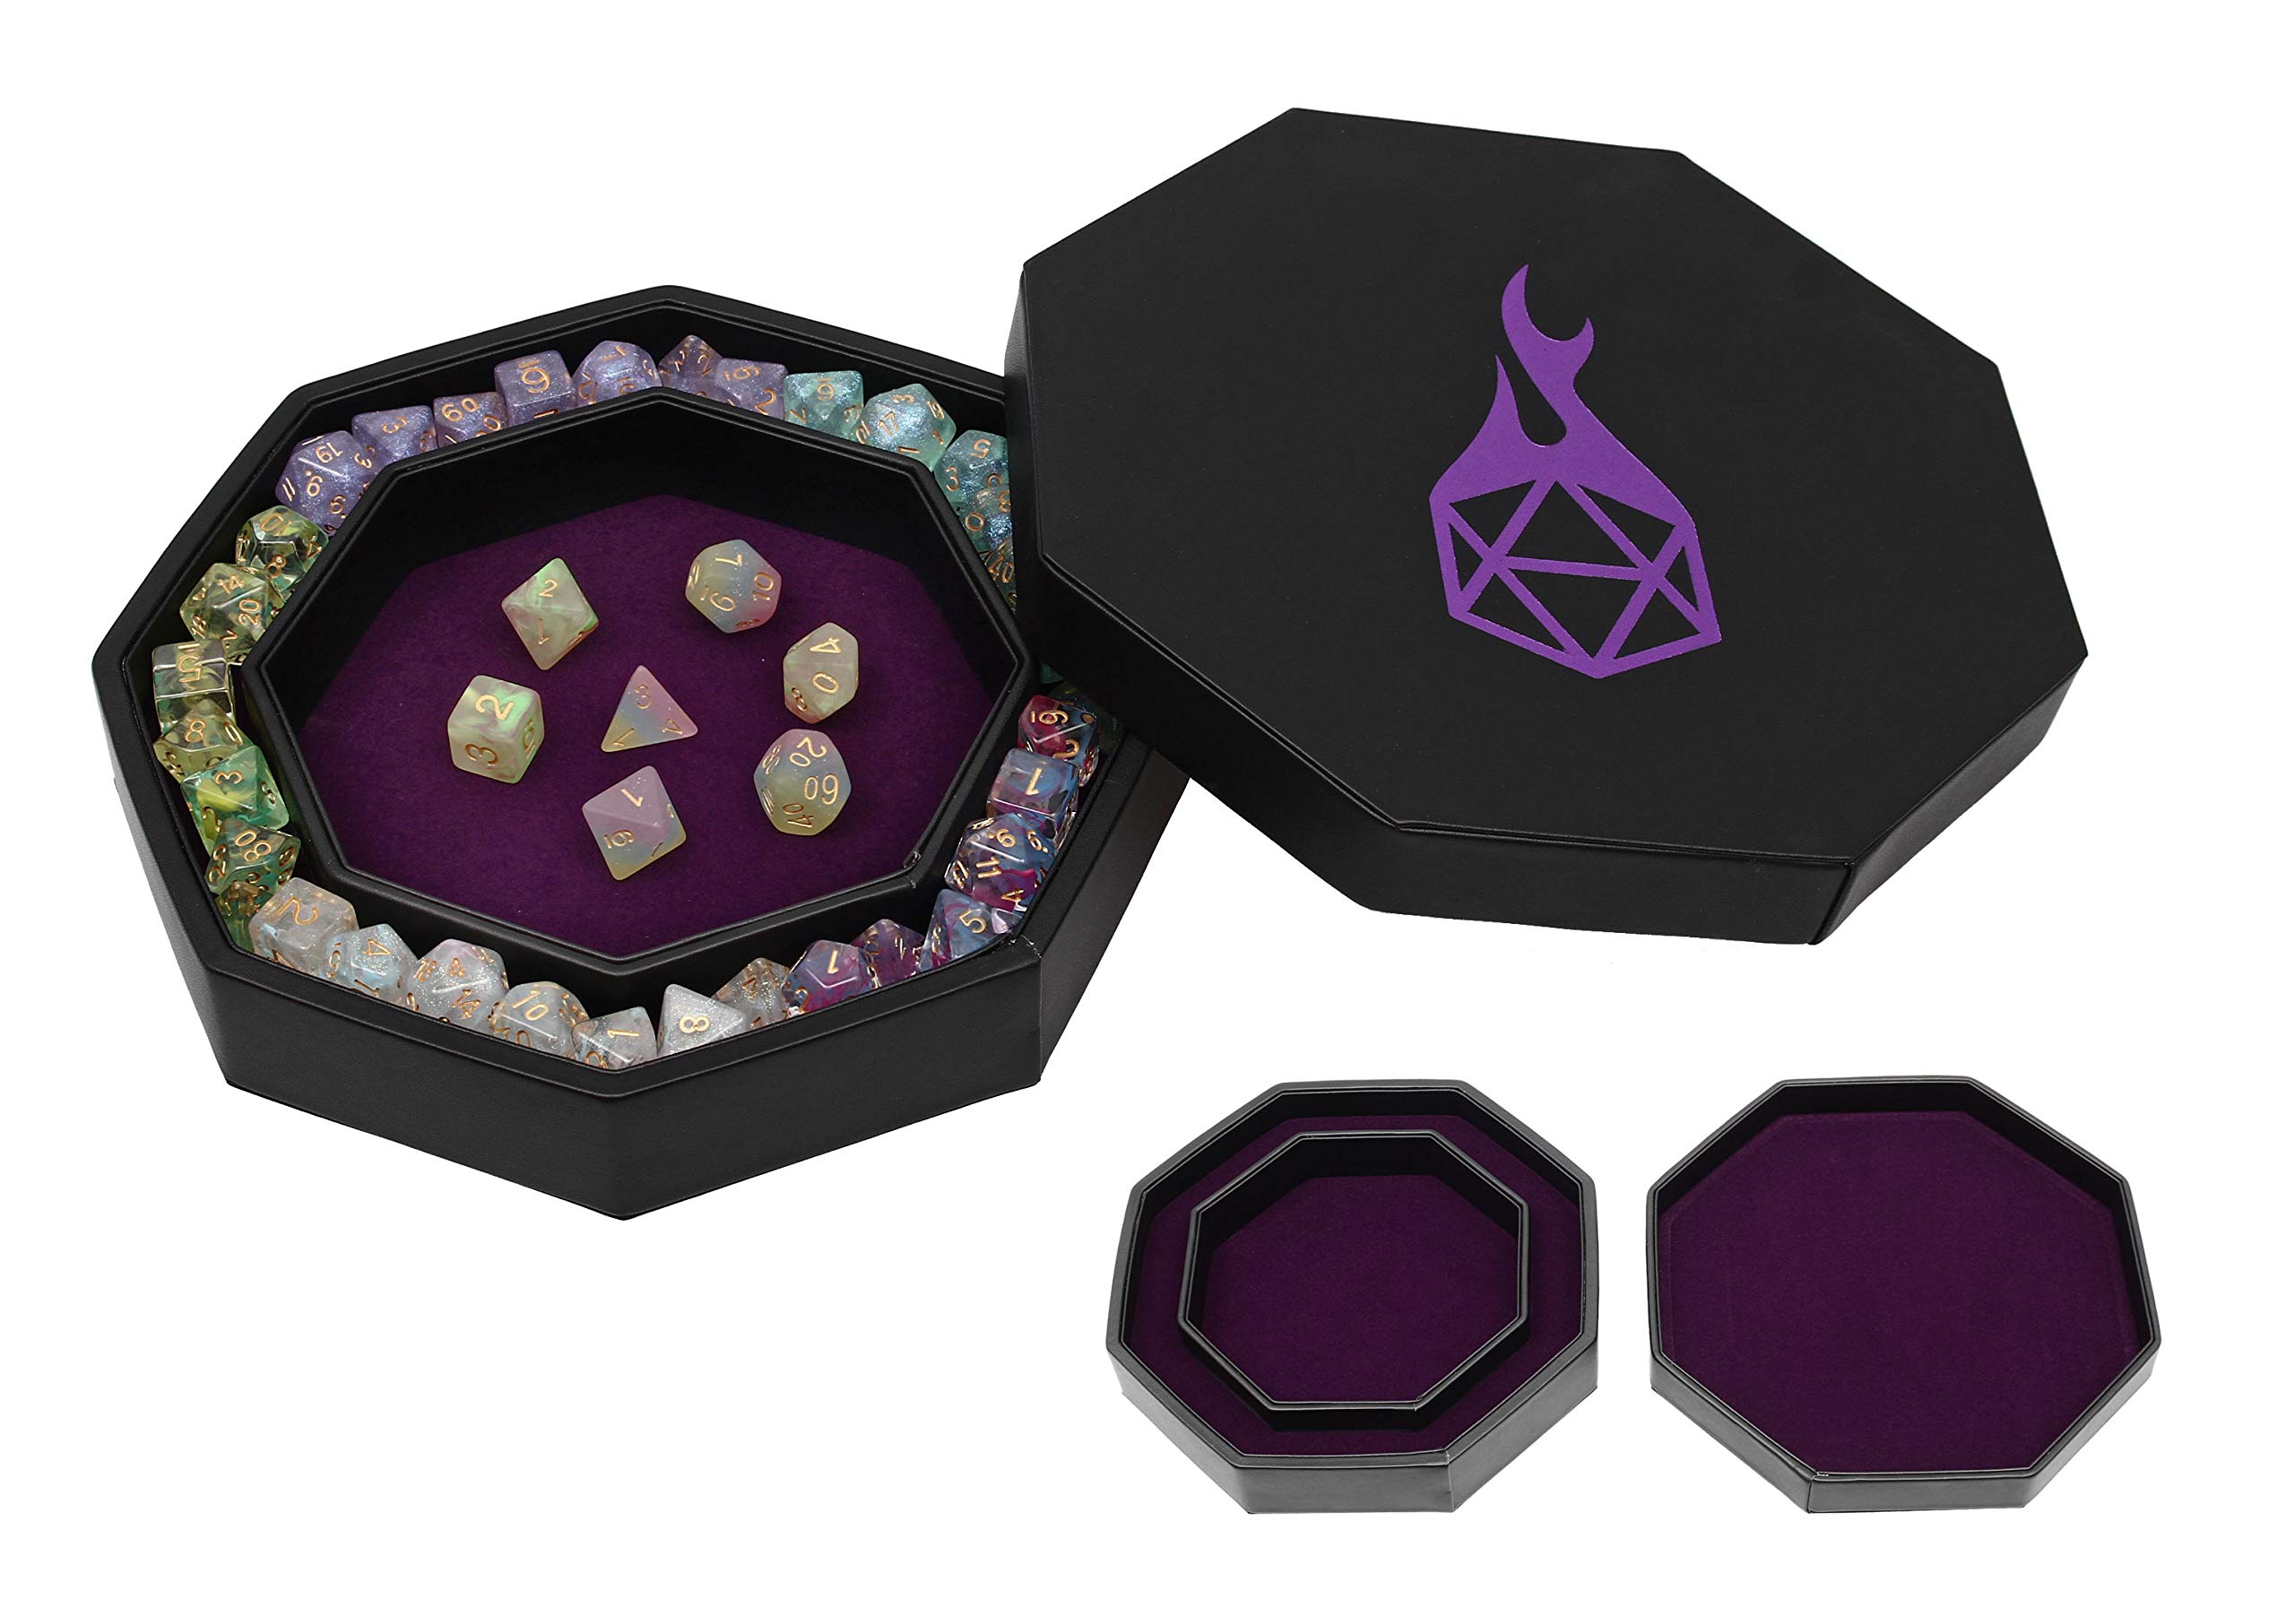 Forged Dice co Dice Tray Arena Rolling Tray and Storage compatible with Any dice game, D&D and RPg gaming (Purple)